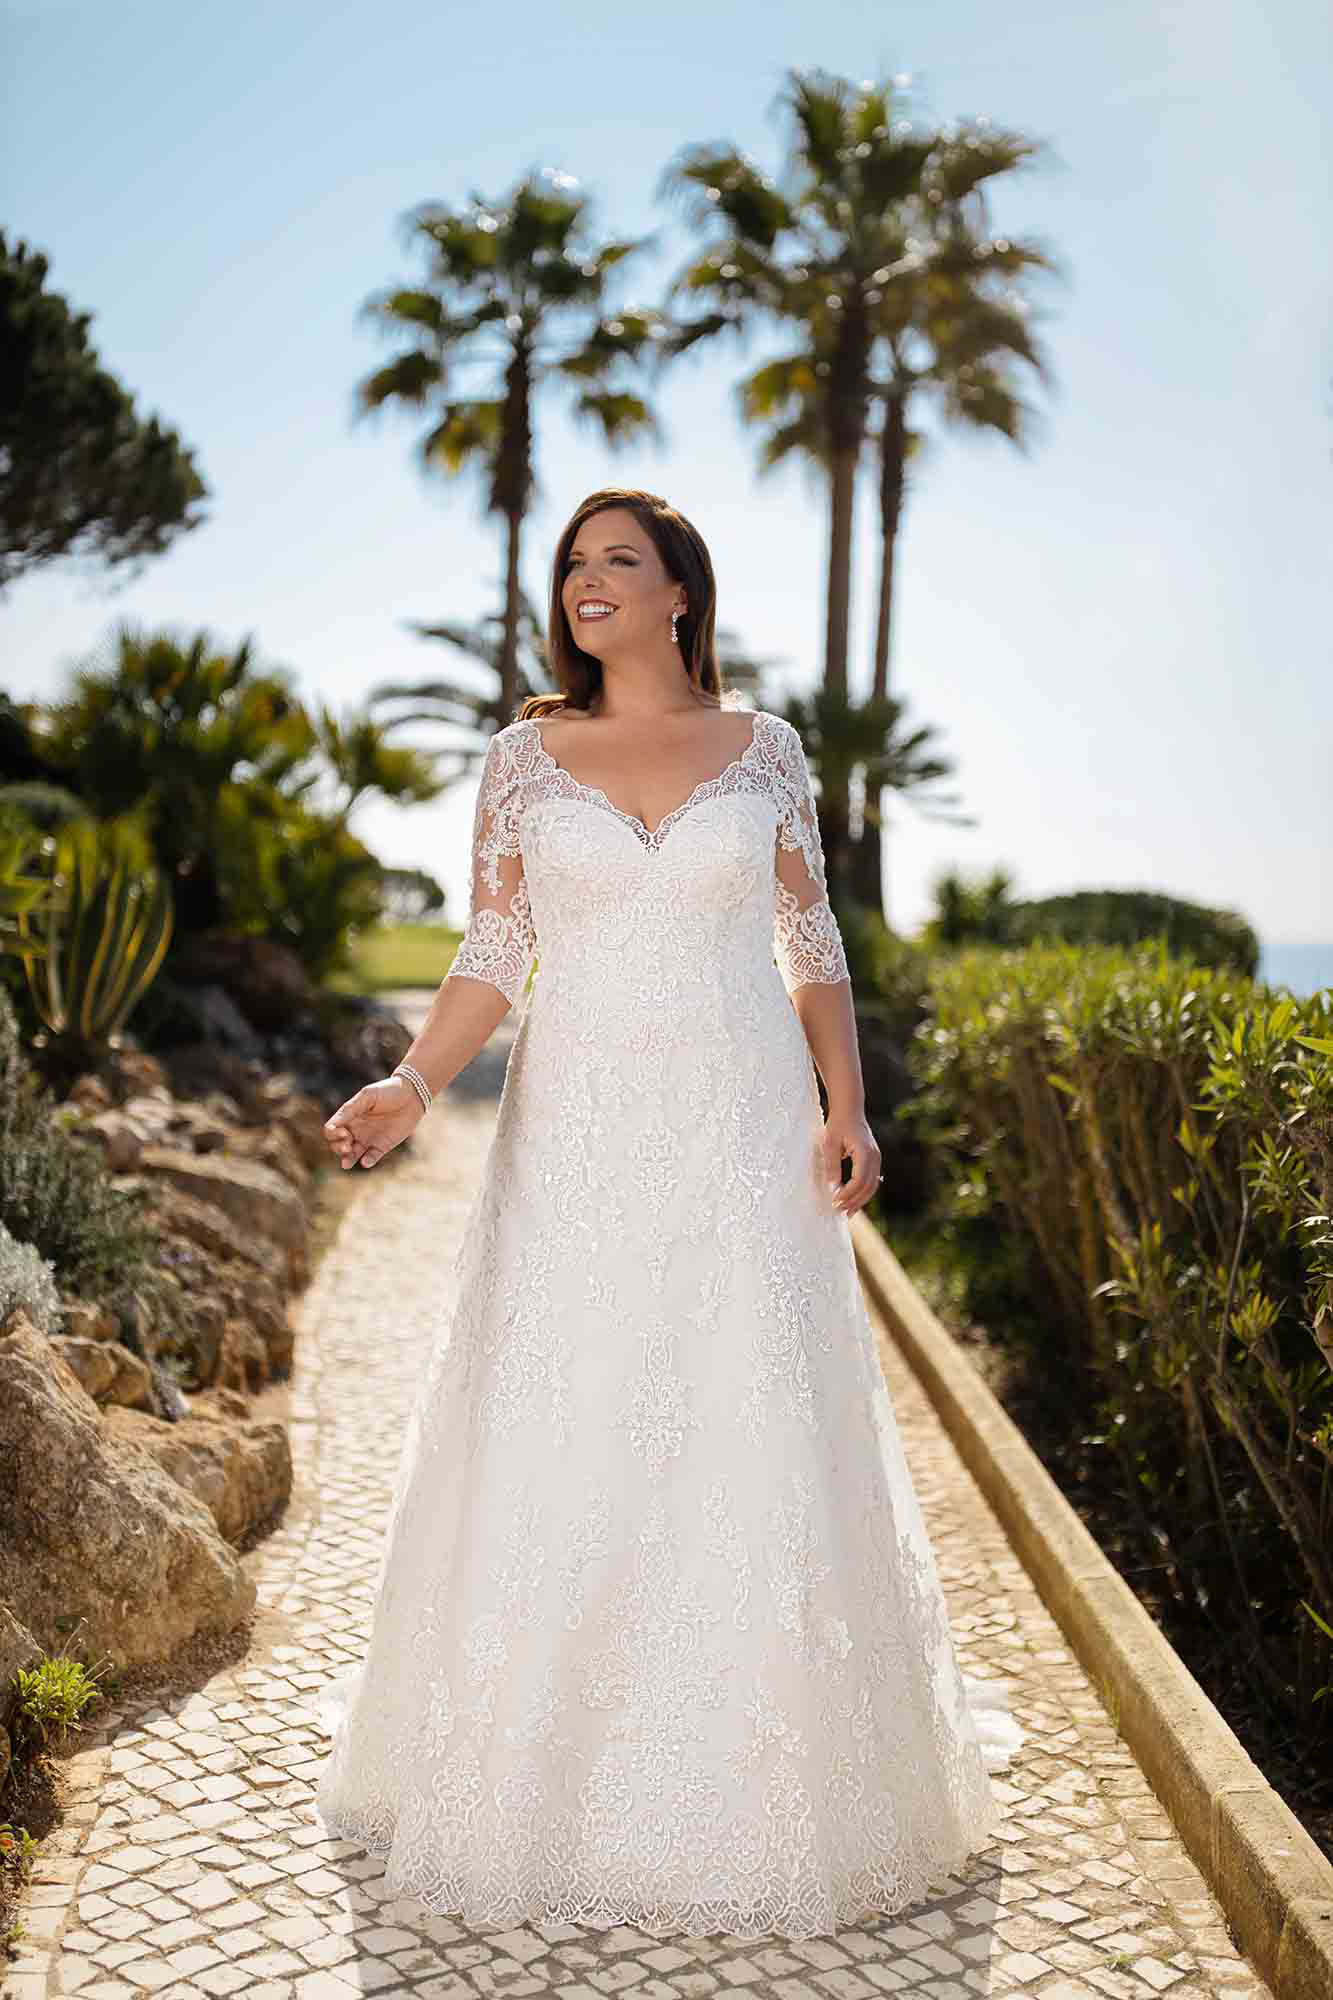 Great Wedding Dress For Me of all time Check it out now 